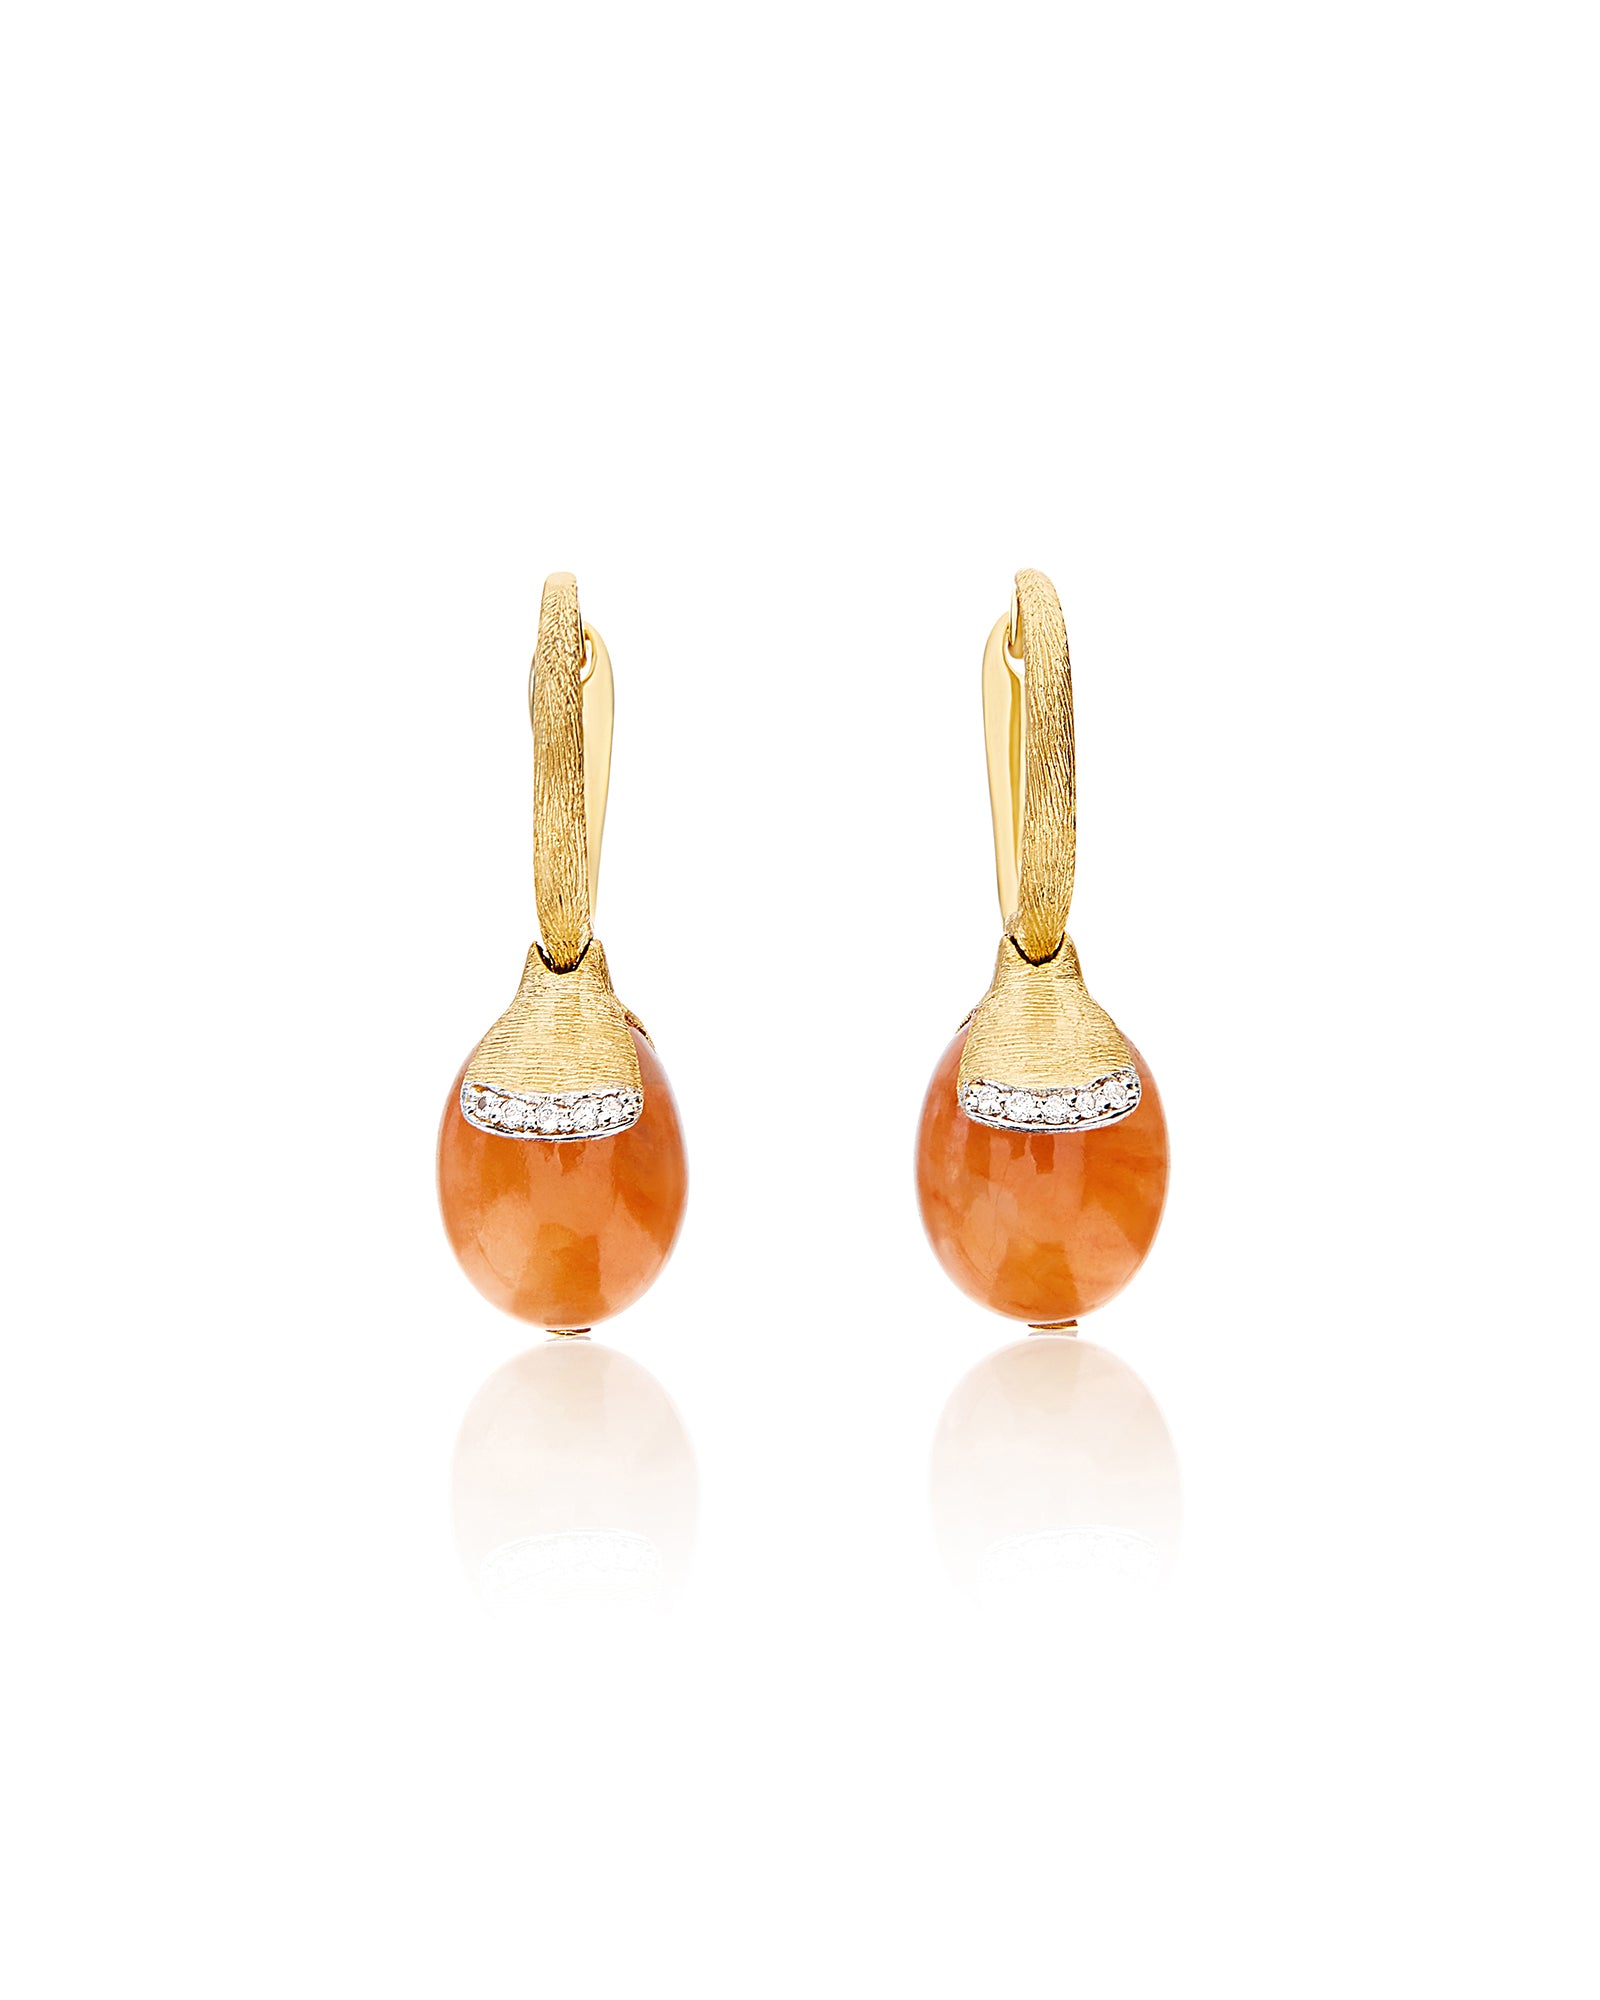 PETRA "AMULETS" CILIEGINE GOLD AND ORANGE AVENTURINE BALL DROP EARRINGS WITH DIAMONDS DETAILS (SMALL) OS11-603